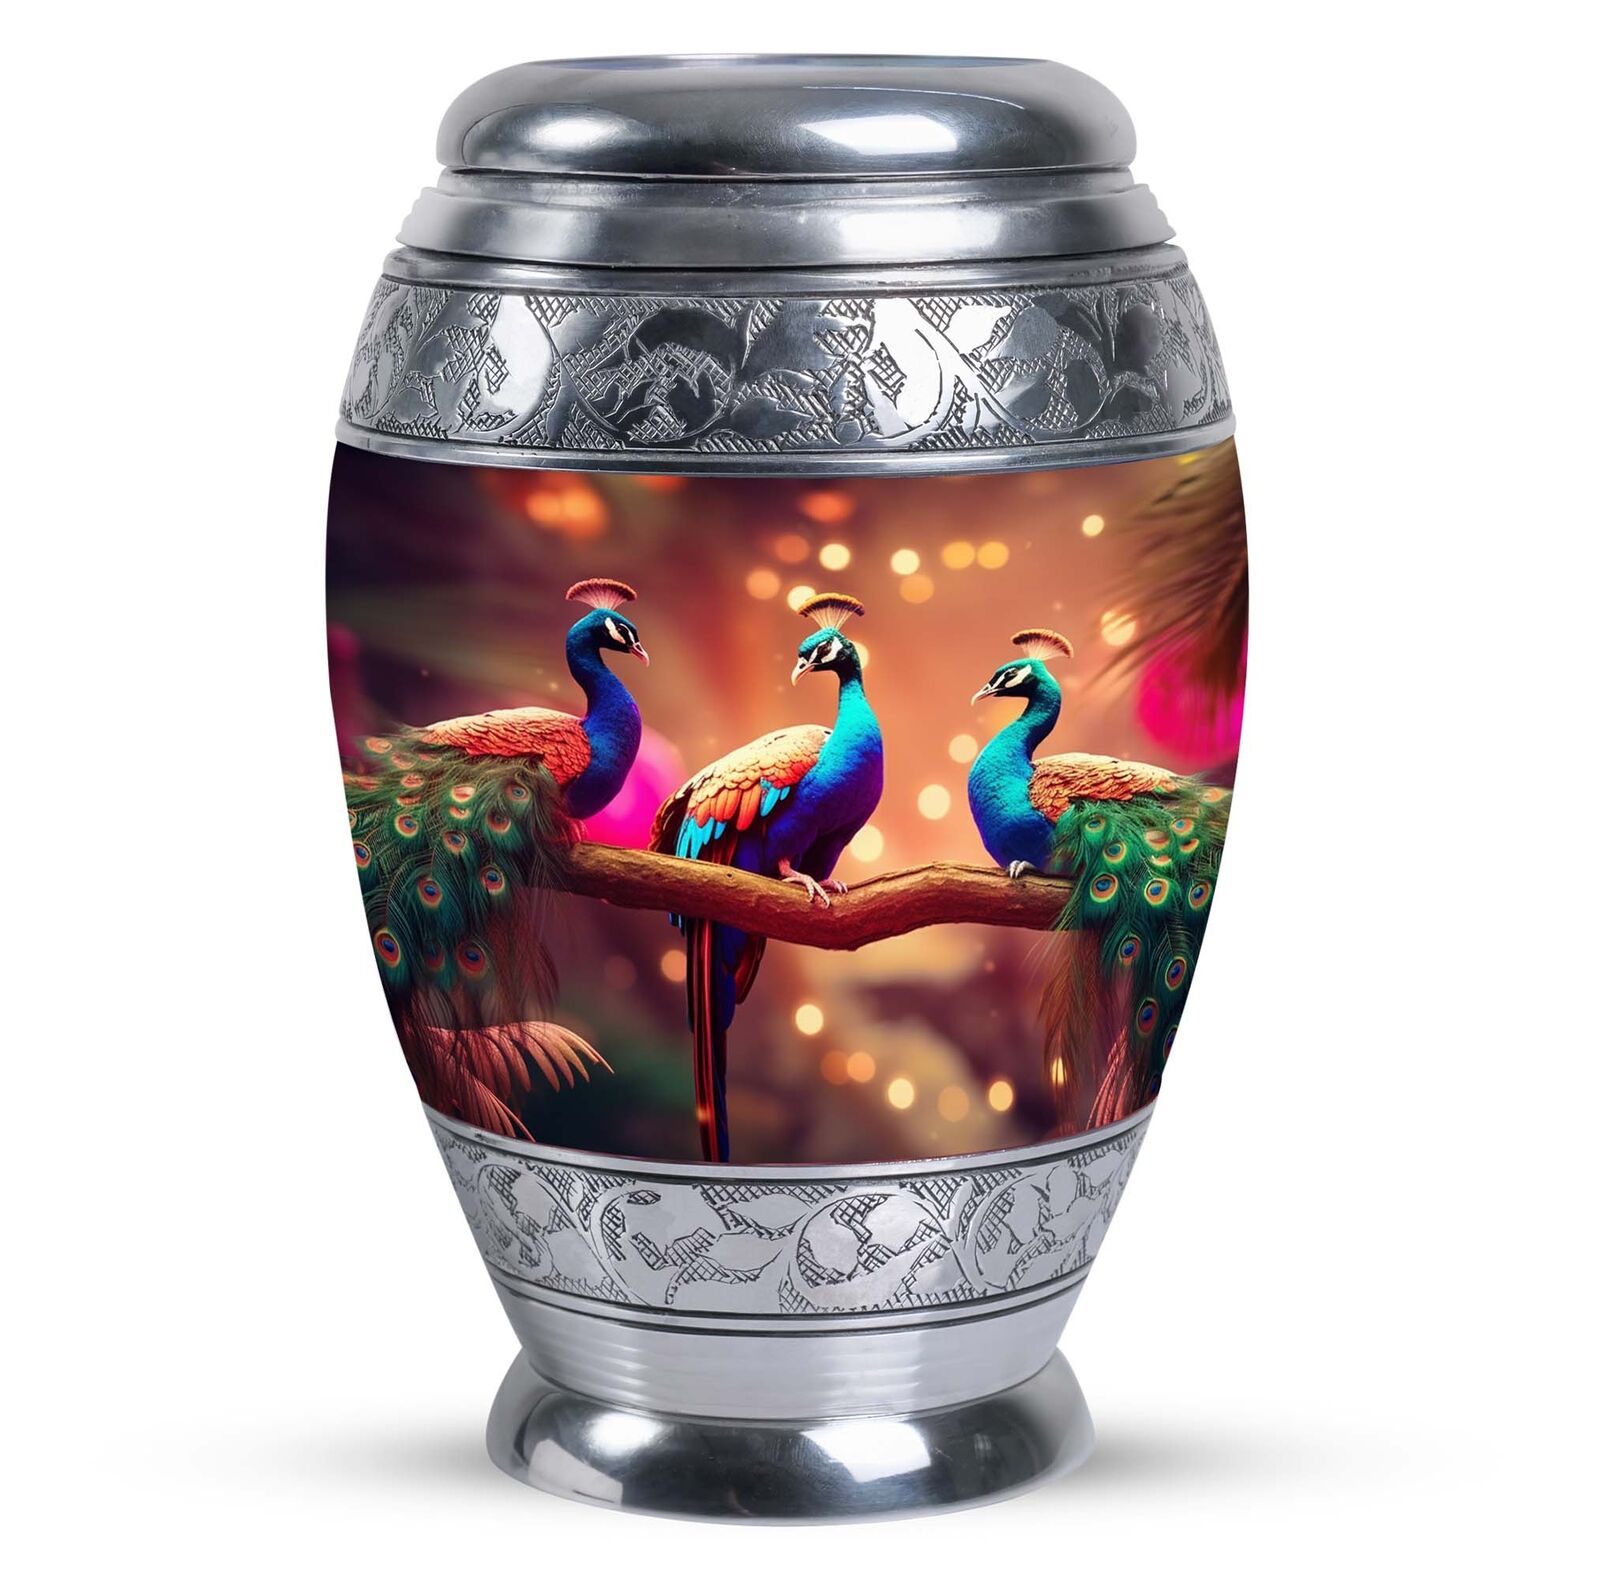 Peacock With a Glowing Tail Memorial Urn Eternal Splendor Large